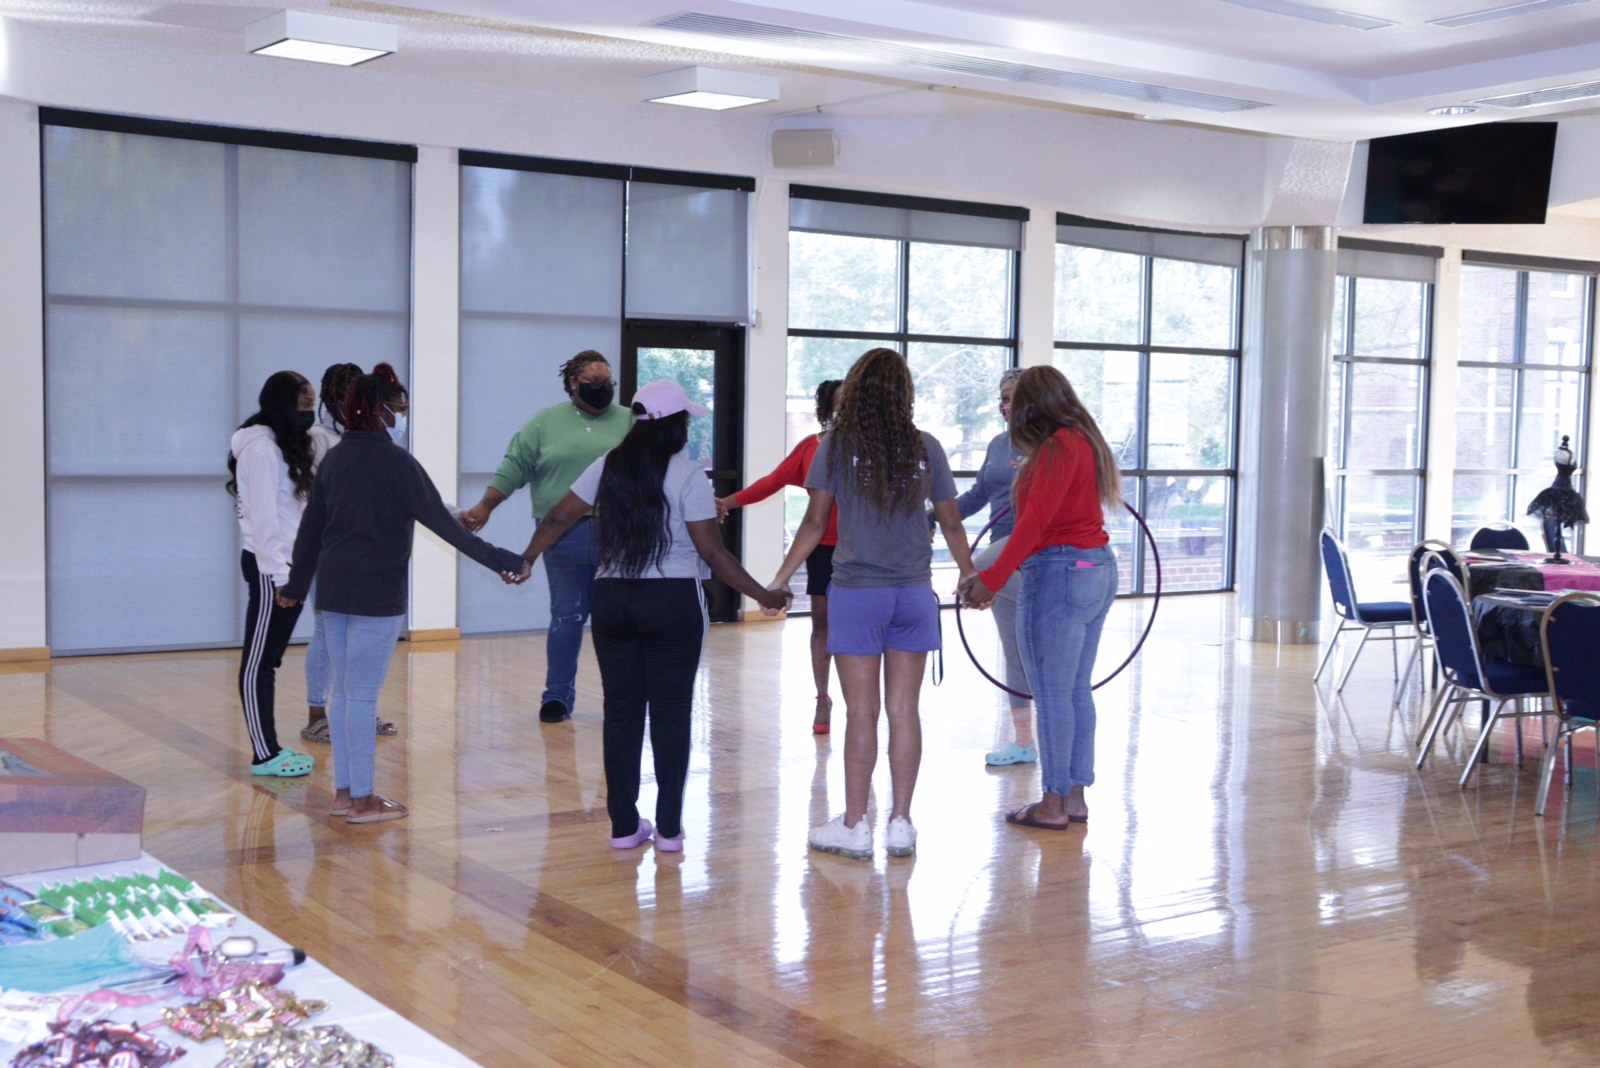 During this ice breaker activity, attendees were asked to move the hula hoop from one end of the circle to the other without unlocking their hands. The purpose was to build community, trust, and camaraderie among the women while also embracing the importance of communication.